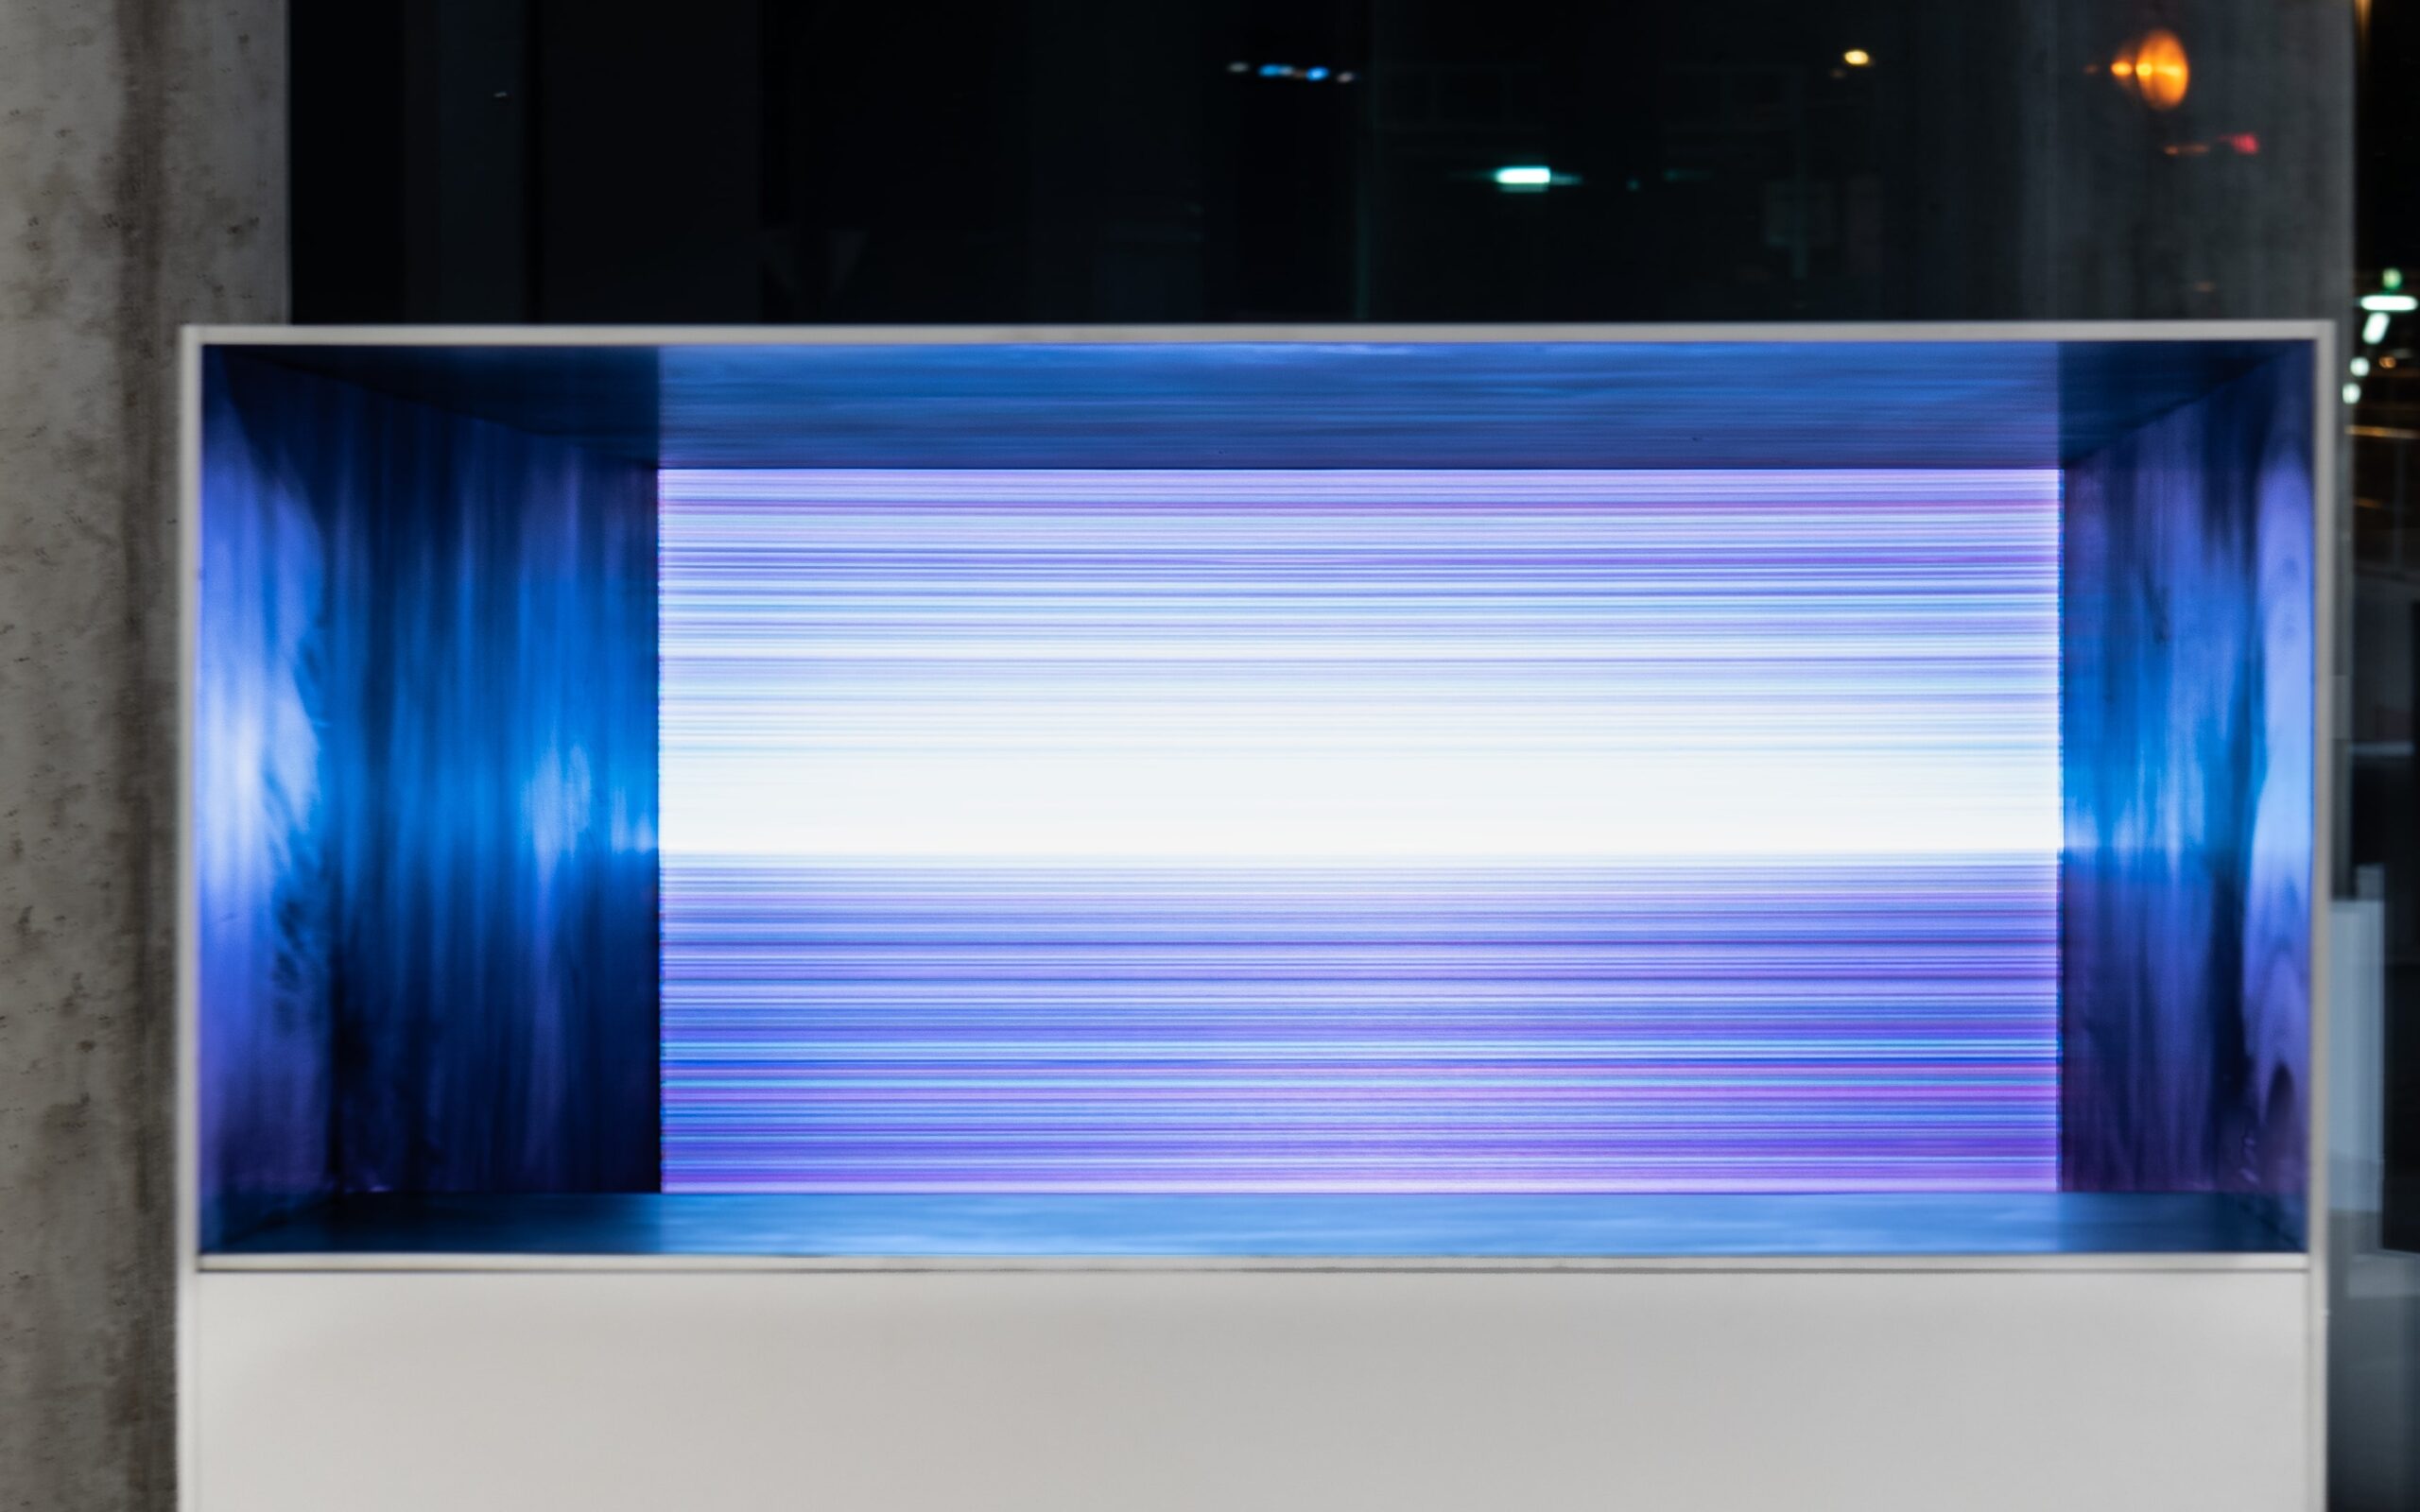 An installation view showing a futuristic box with a white base and filled with beams of blue and purple light